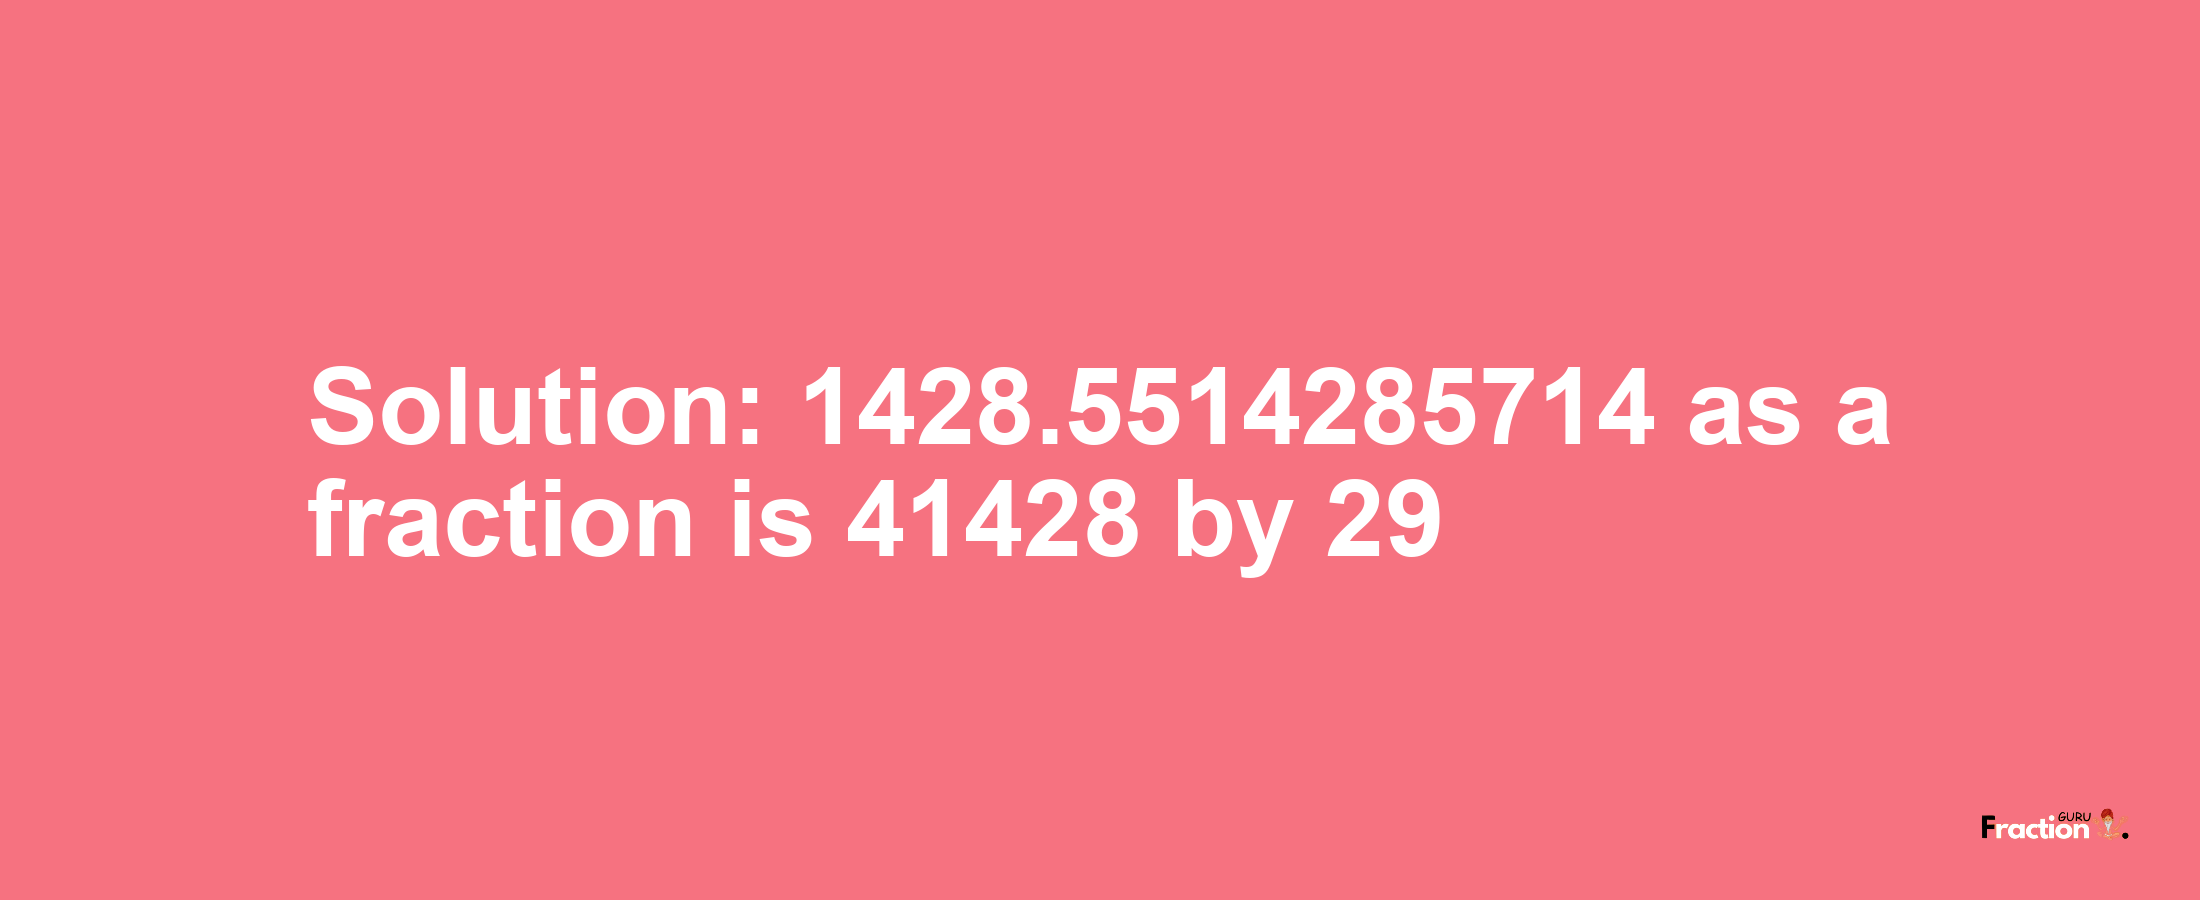 Solution:1428.5514285714 as a fraction is 41428/29